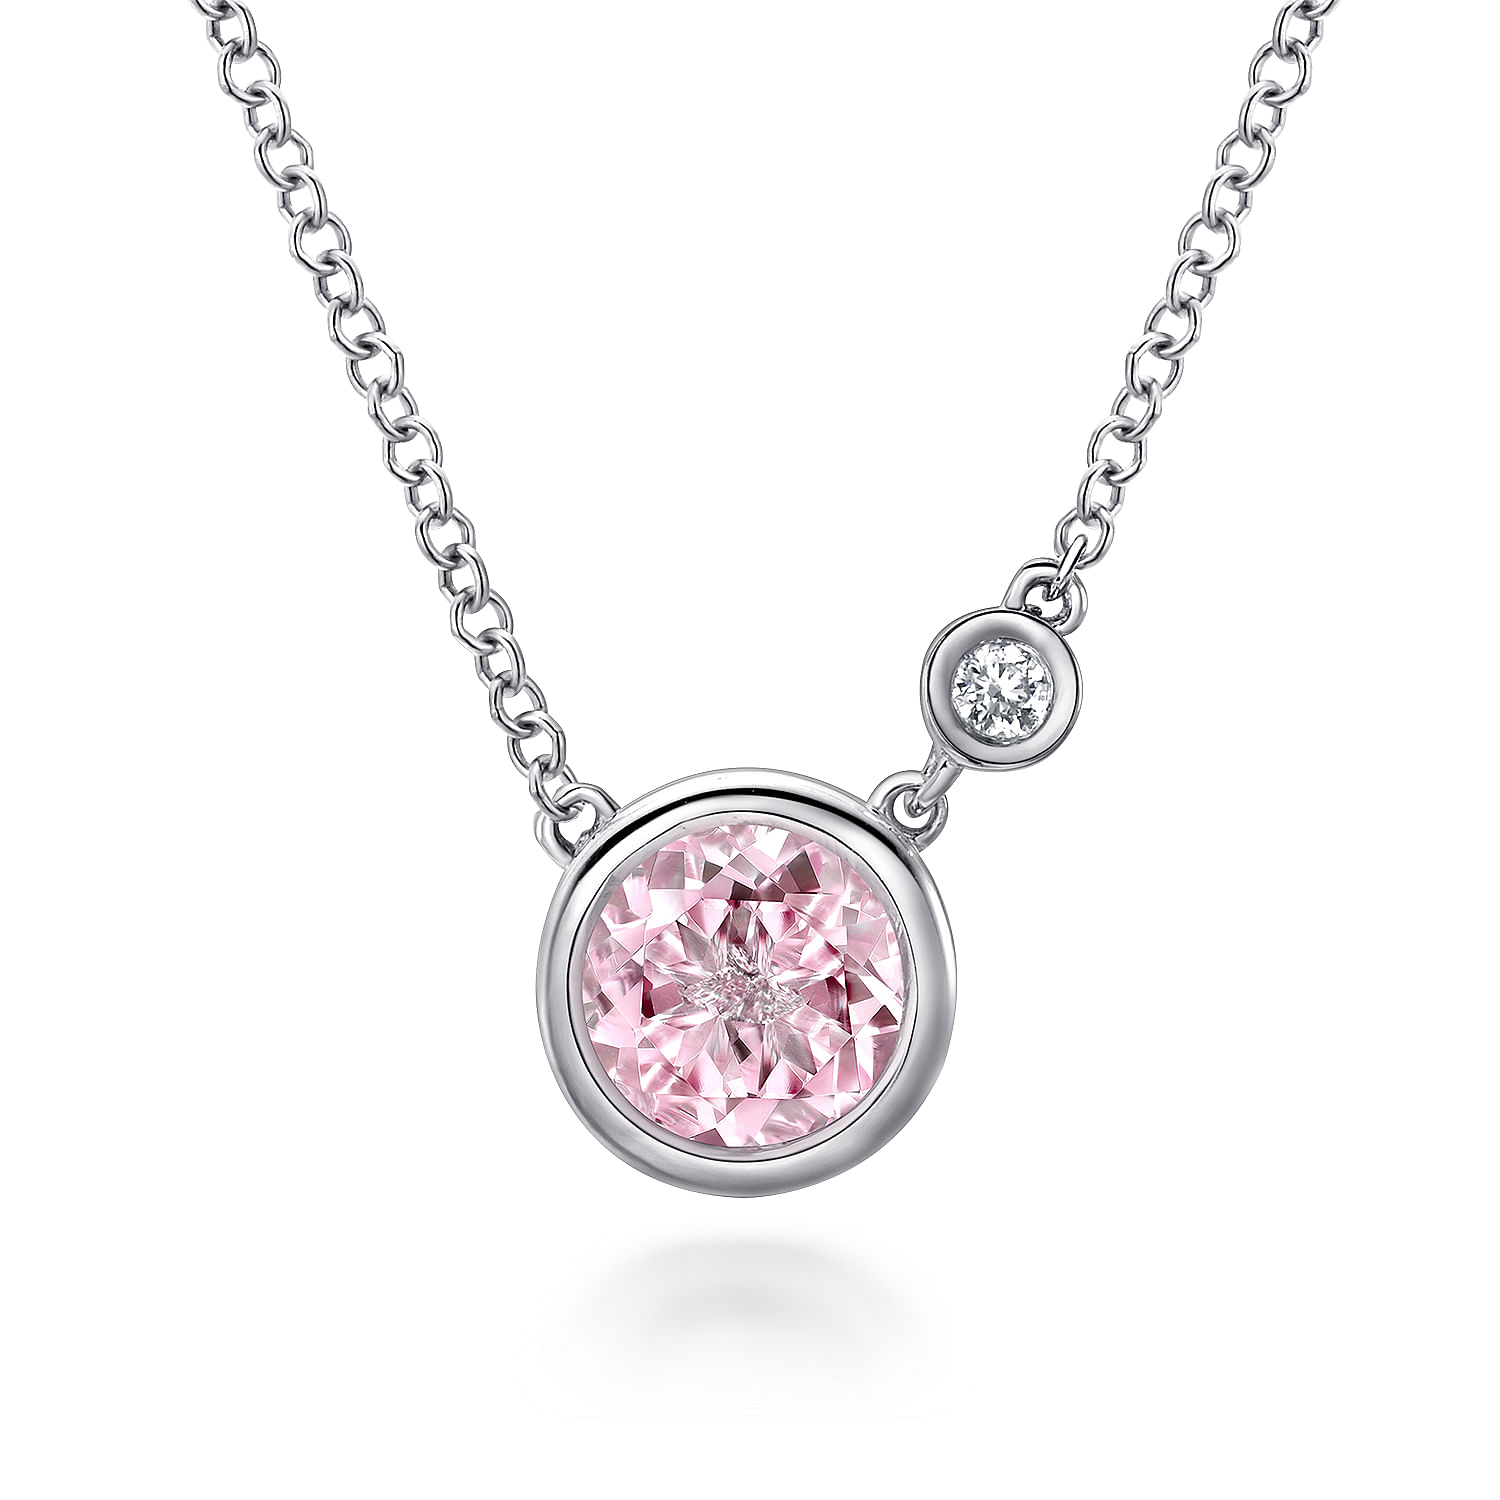 Sterling Silver Round Bezel Set Pink Created Zircon and Diamond Pendant Necklace